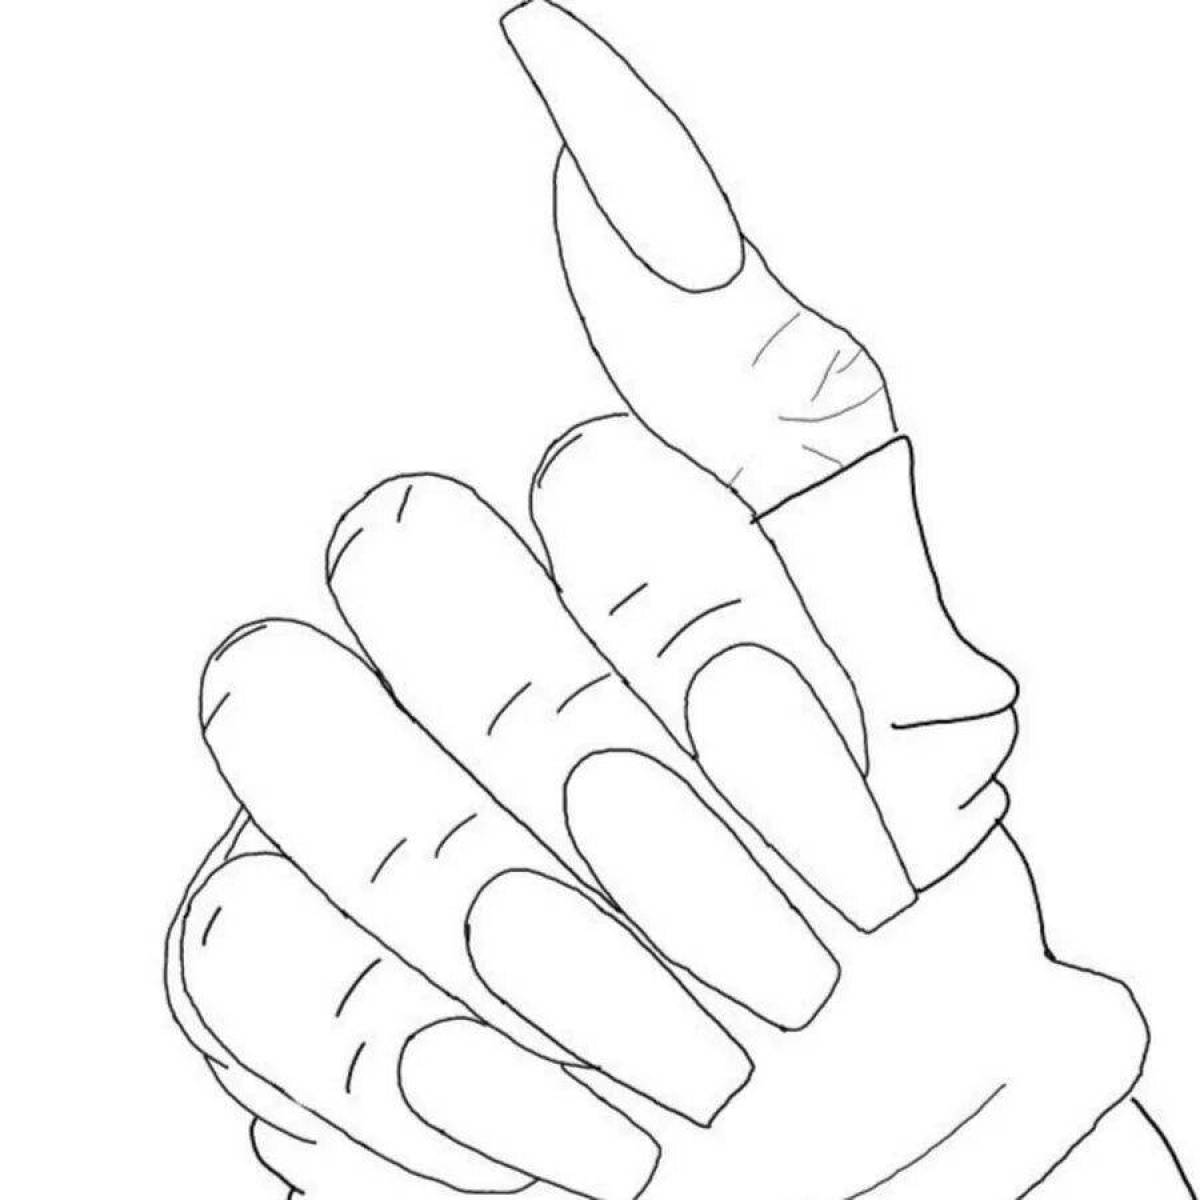 Coloring book luxury hand with long nails